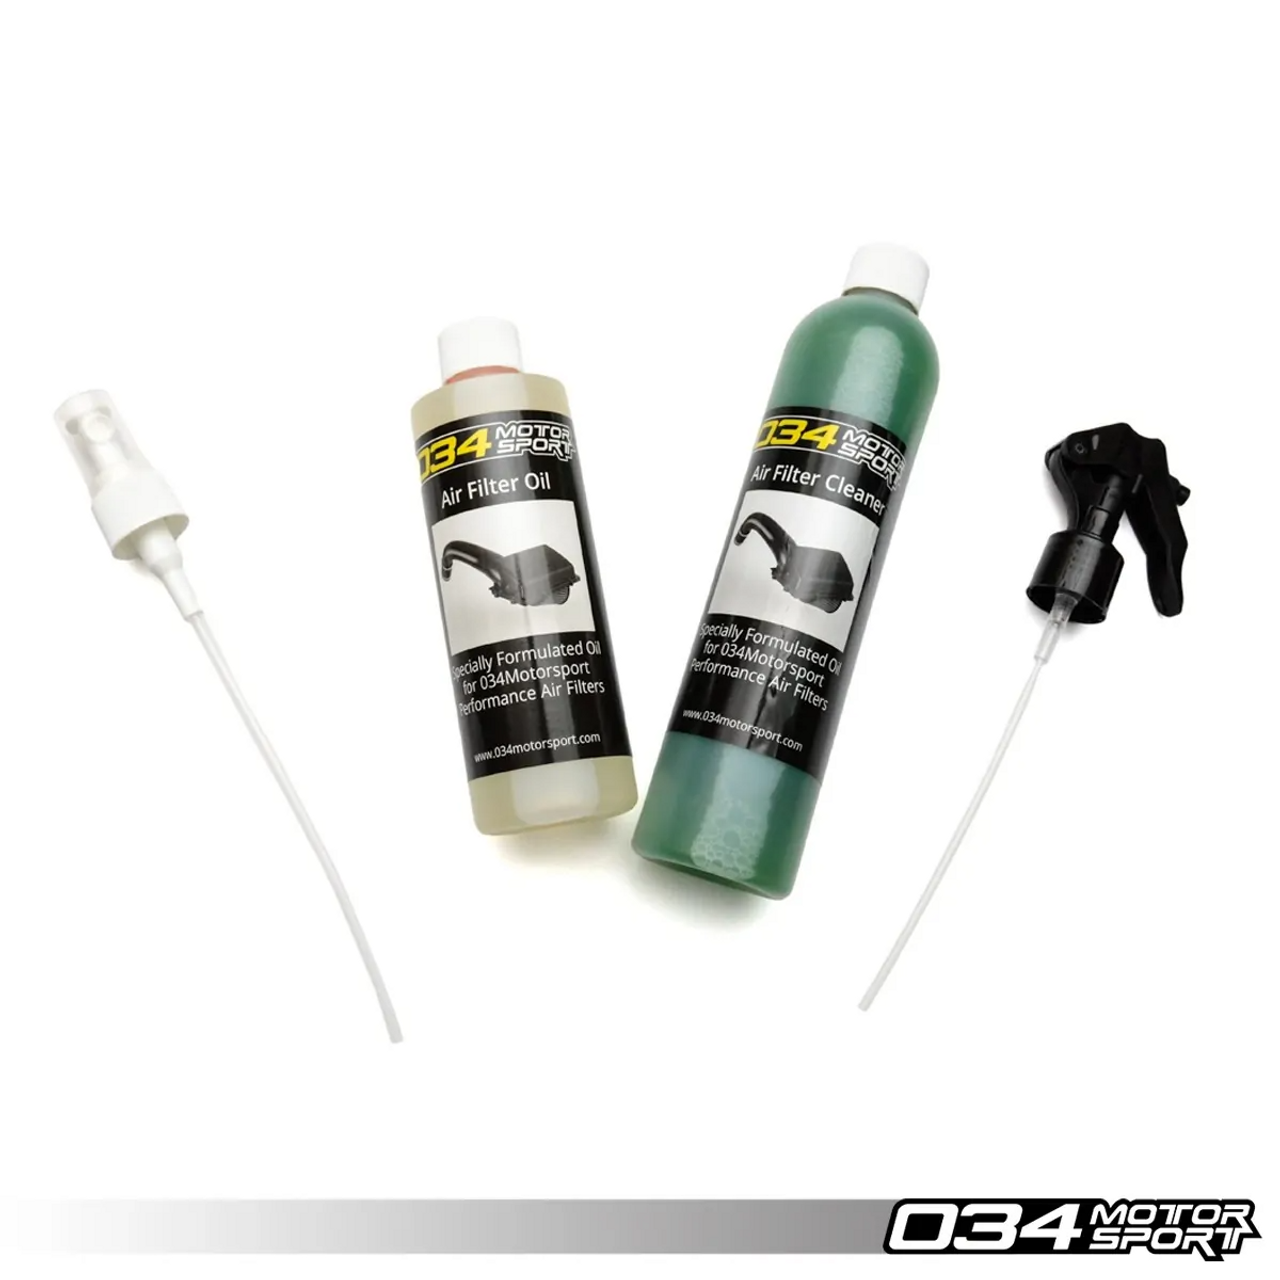 Air Filter Cleaning Kit, 034Mo